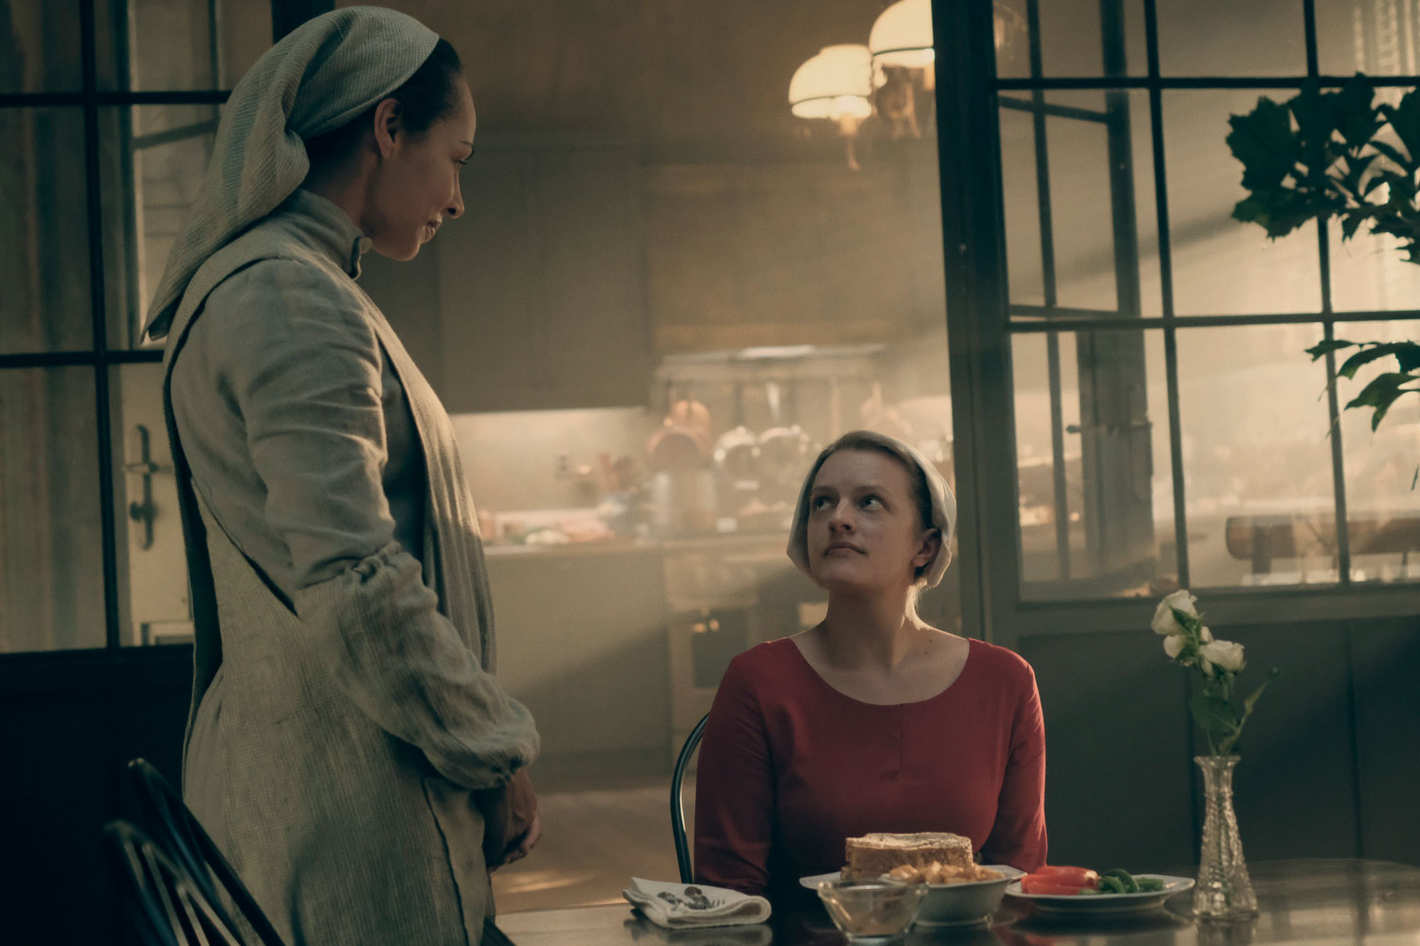 This Week’s Handmaid’s Tale Reminds Us That Even The Strongest Soul Has A Breaking Point